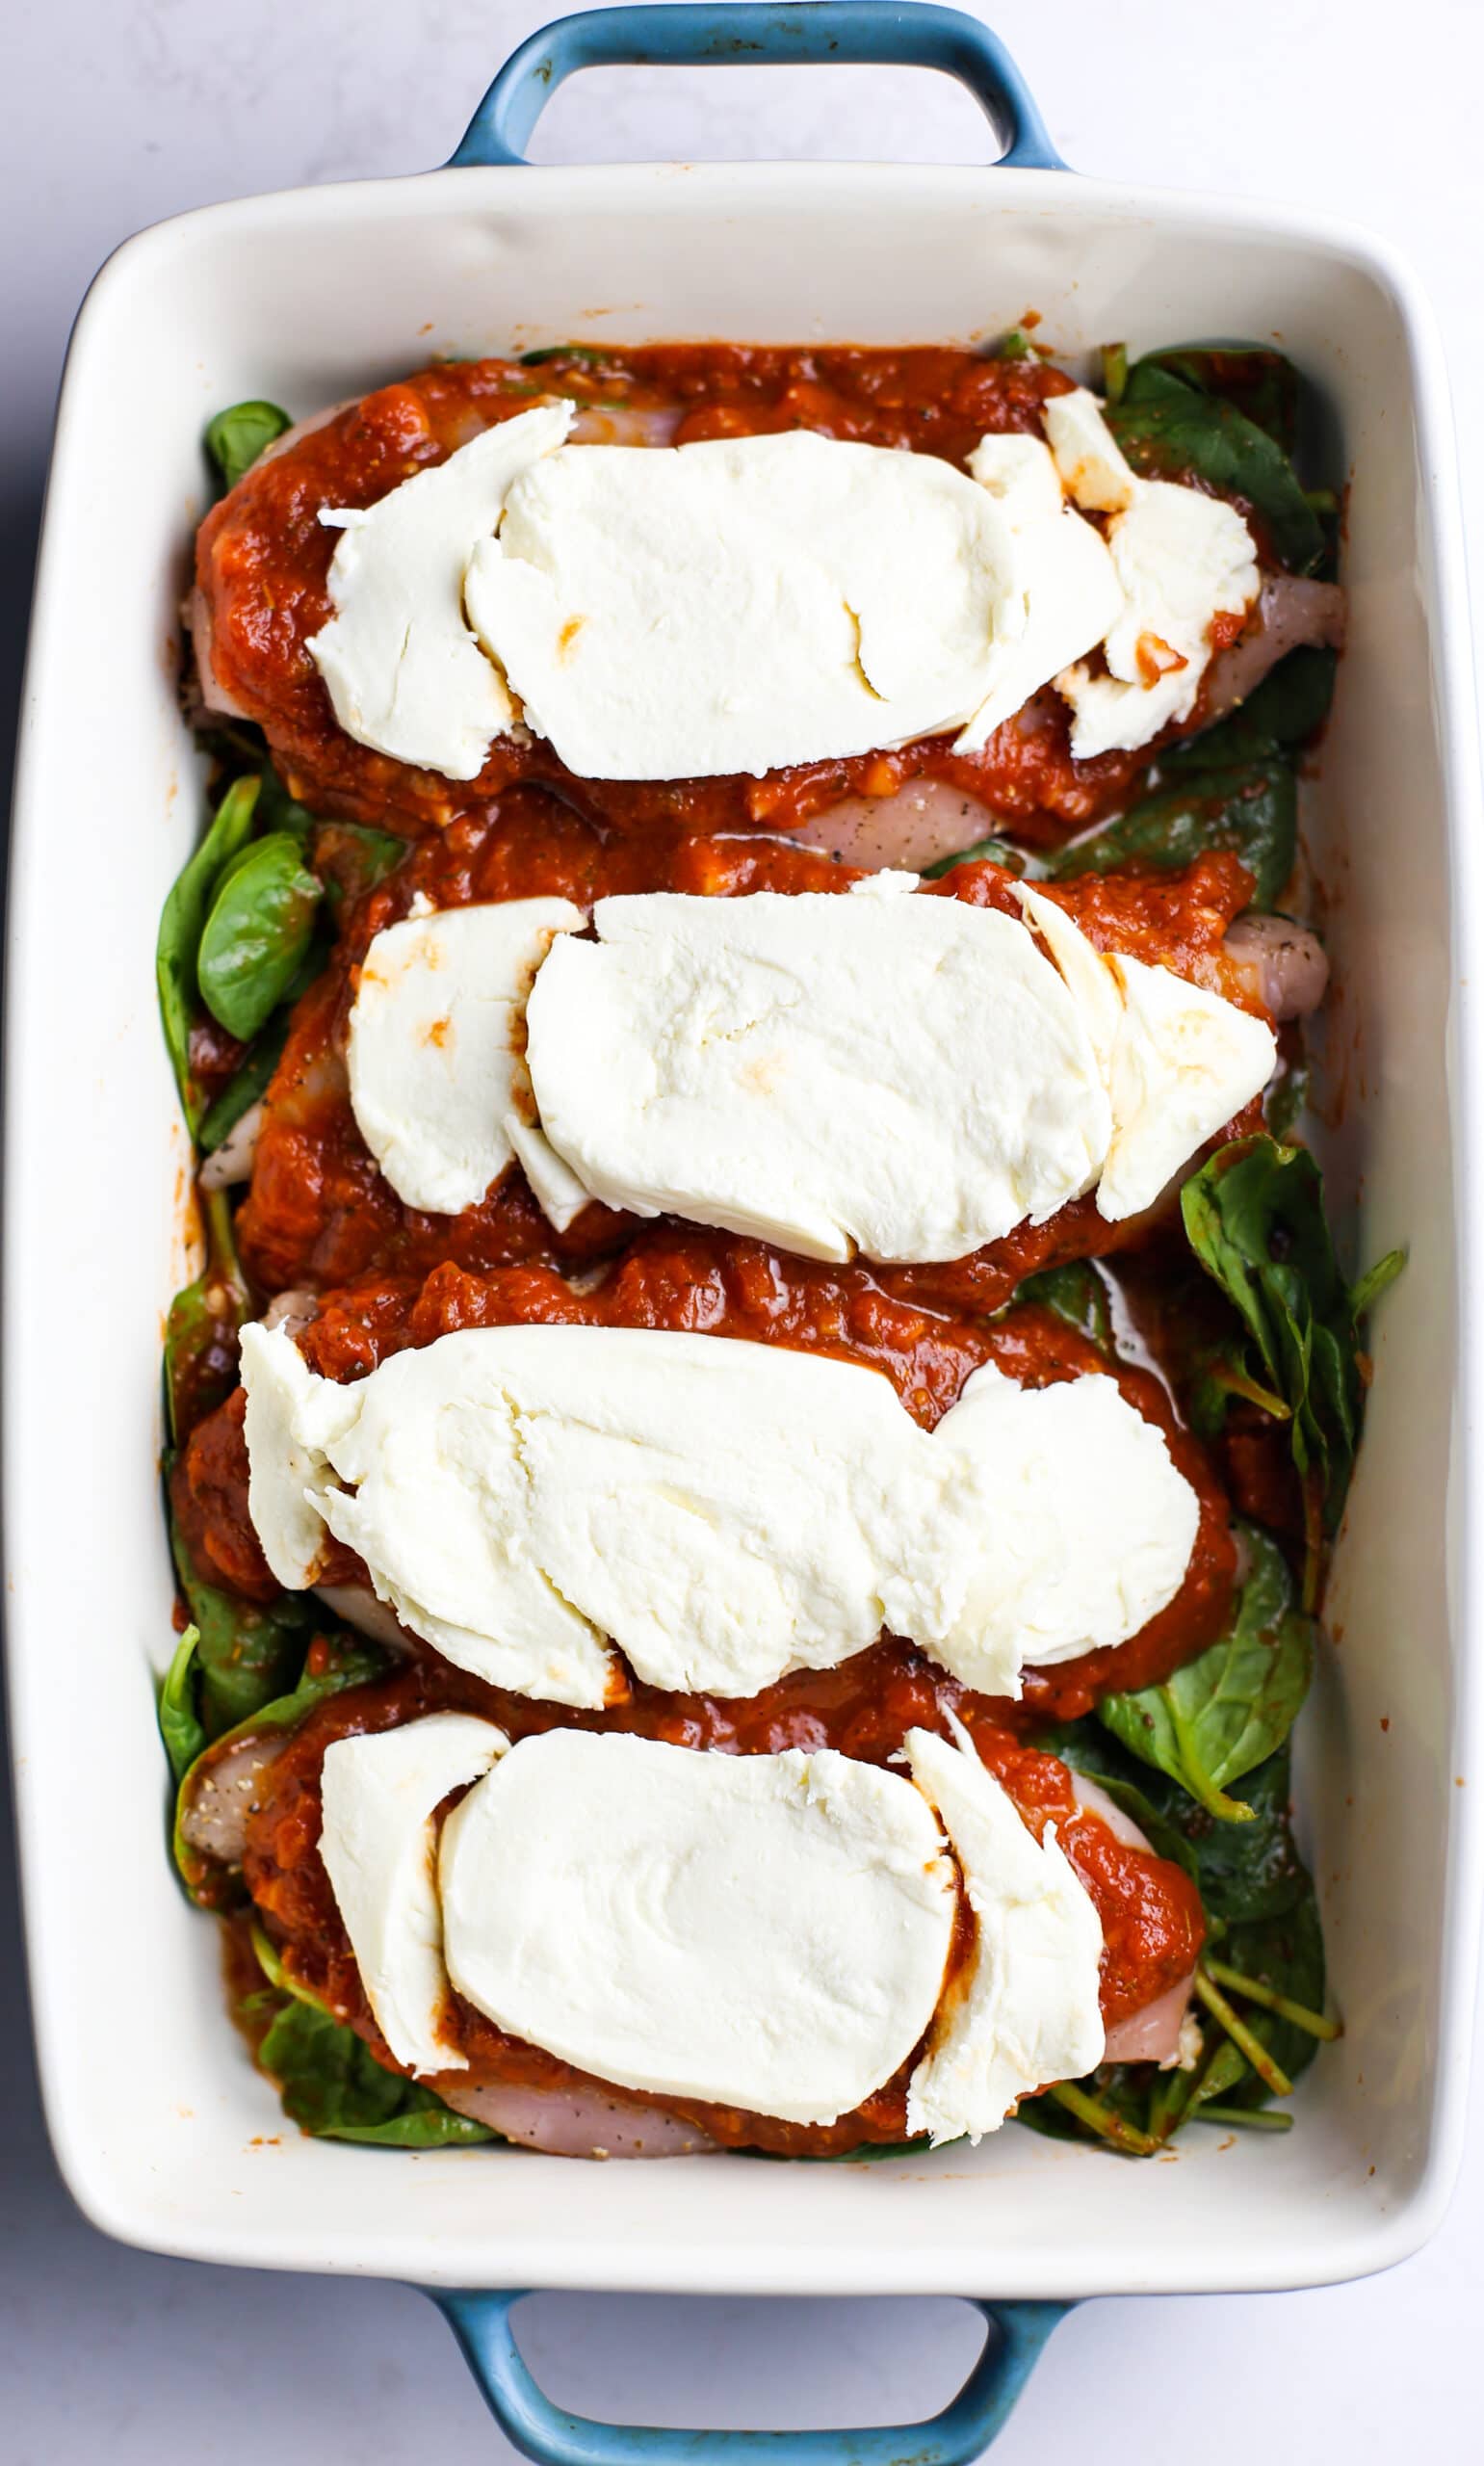 Four raw chicken breasts topped with marinara sauce and mozzerella cheese on a bed of spinach in a casserole dish.